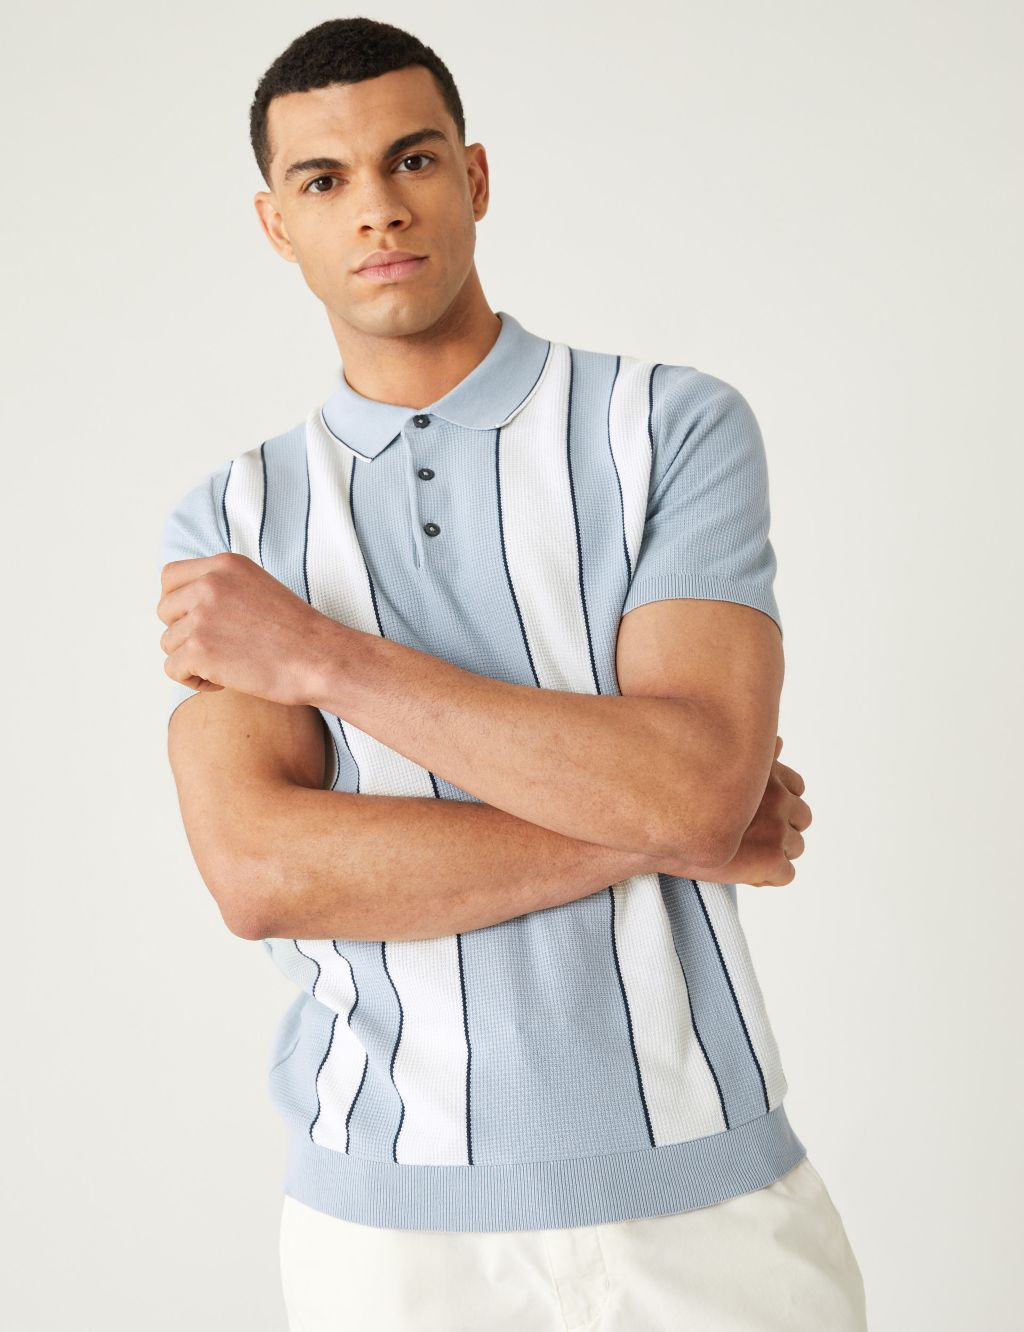 Cotton Rich Striped Knitted Polo Shirt image 1